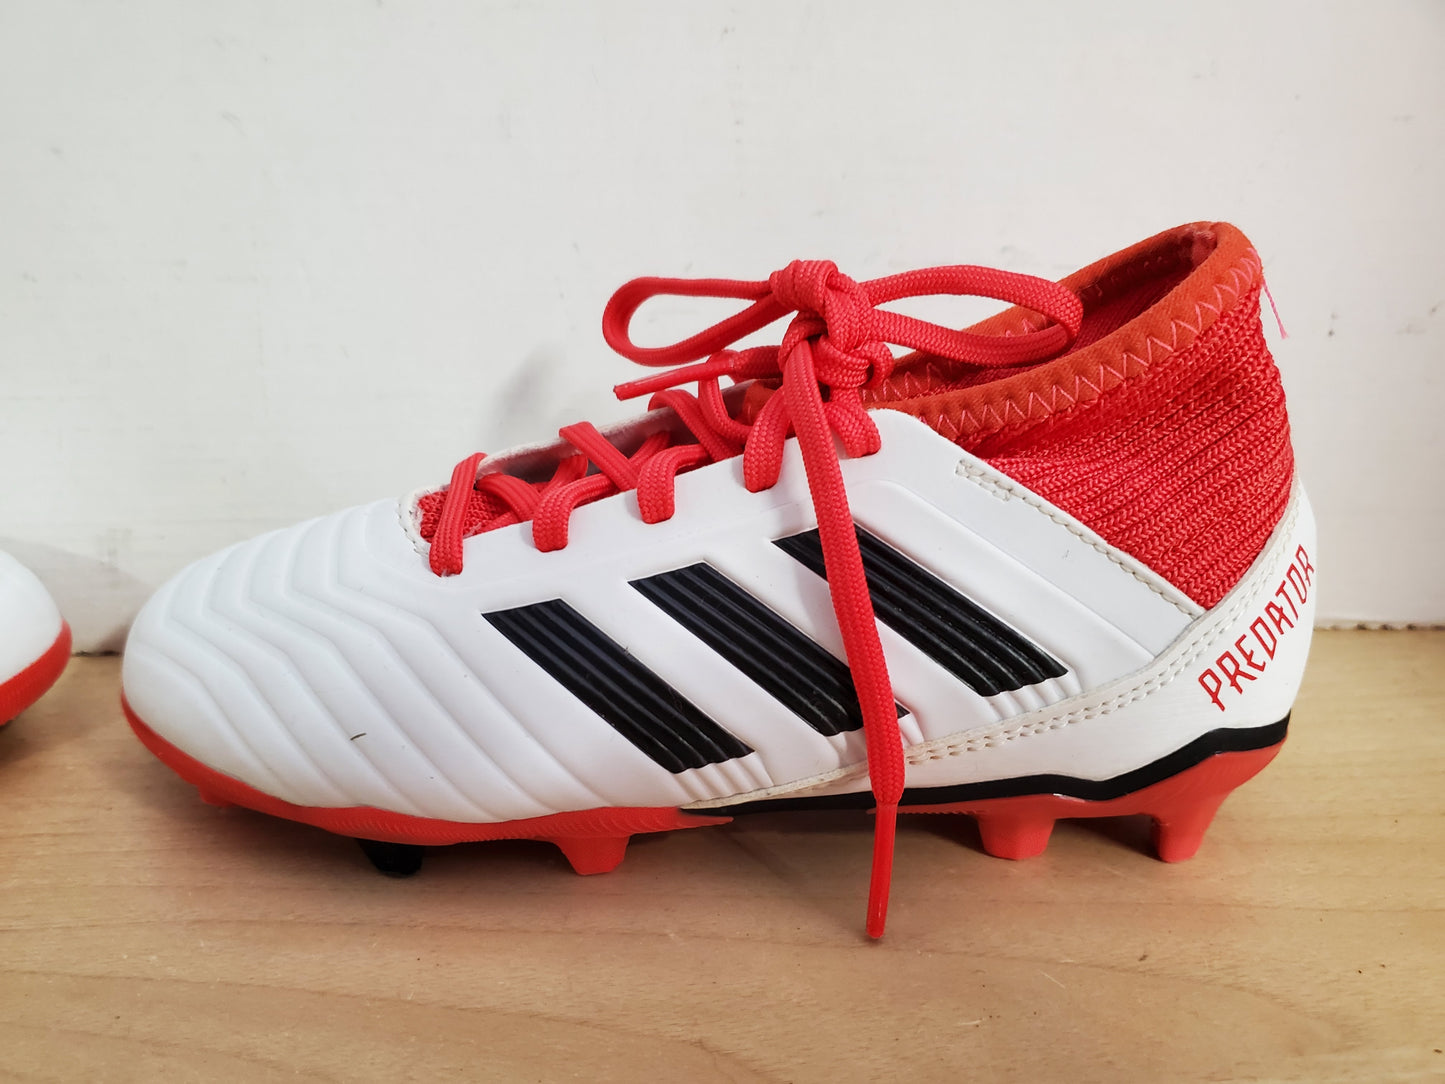 Soccer Shoes Cleats Child Size 13 Adidas Preditor With Slipper Foot White Red Excellent As New